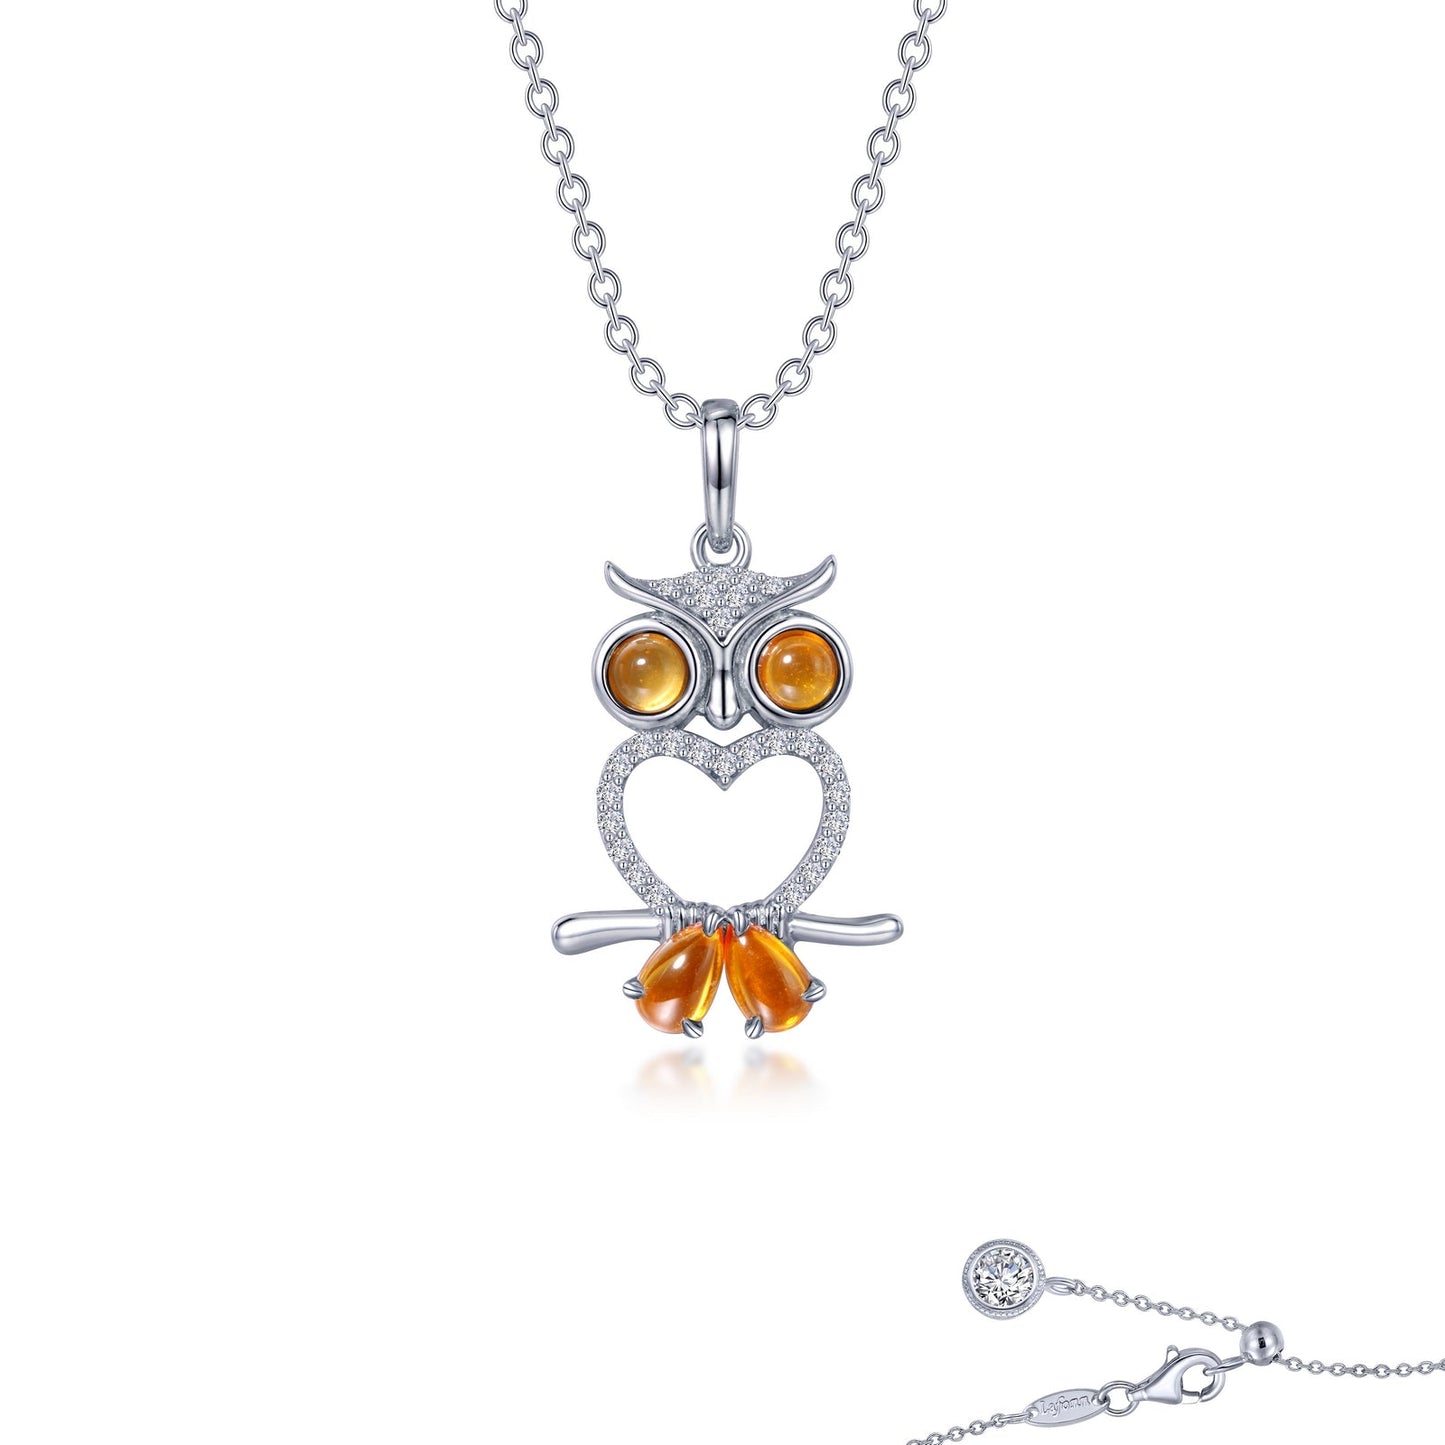 Load image into Gallery viewer, Lafonn Fancy Lab-Grown Sapphire Owl Necklace YELLOW CORUNDUM NECKLACES Platinum Appx CTW: 0.74 cts. CTS Approx. 25.5mm (H) x 14.3mm (W)
